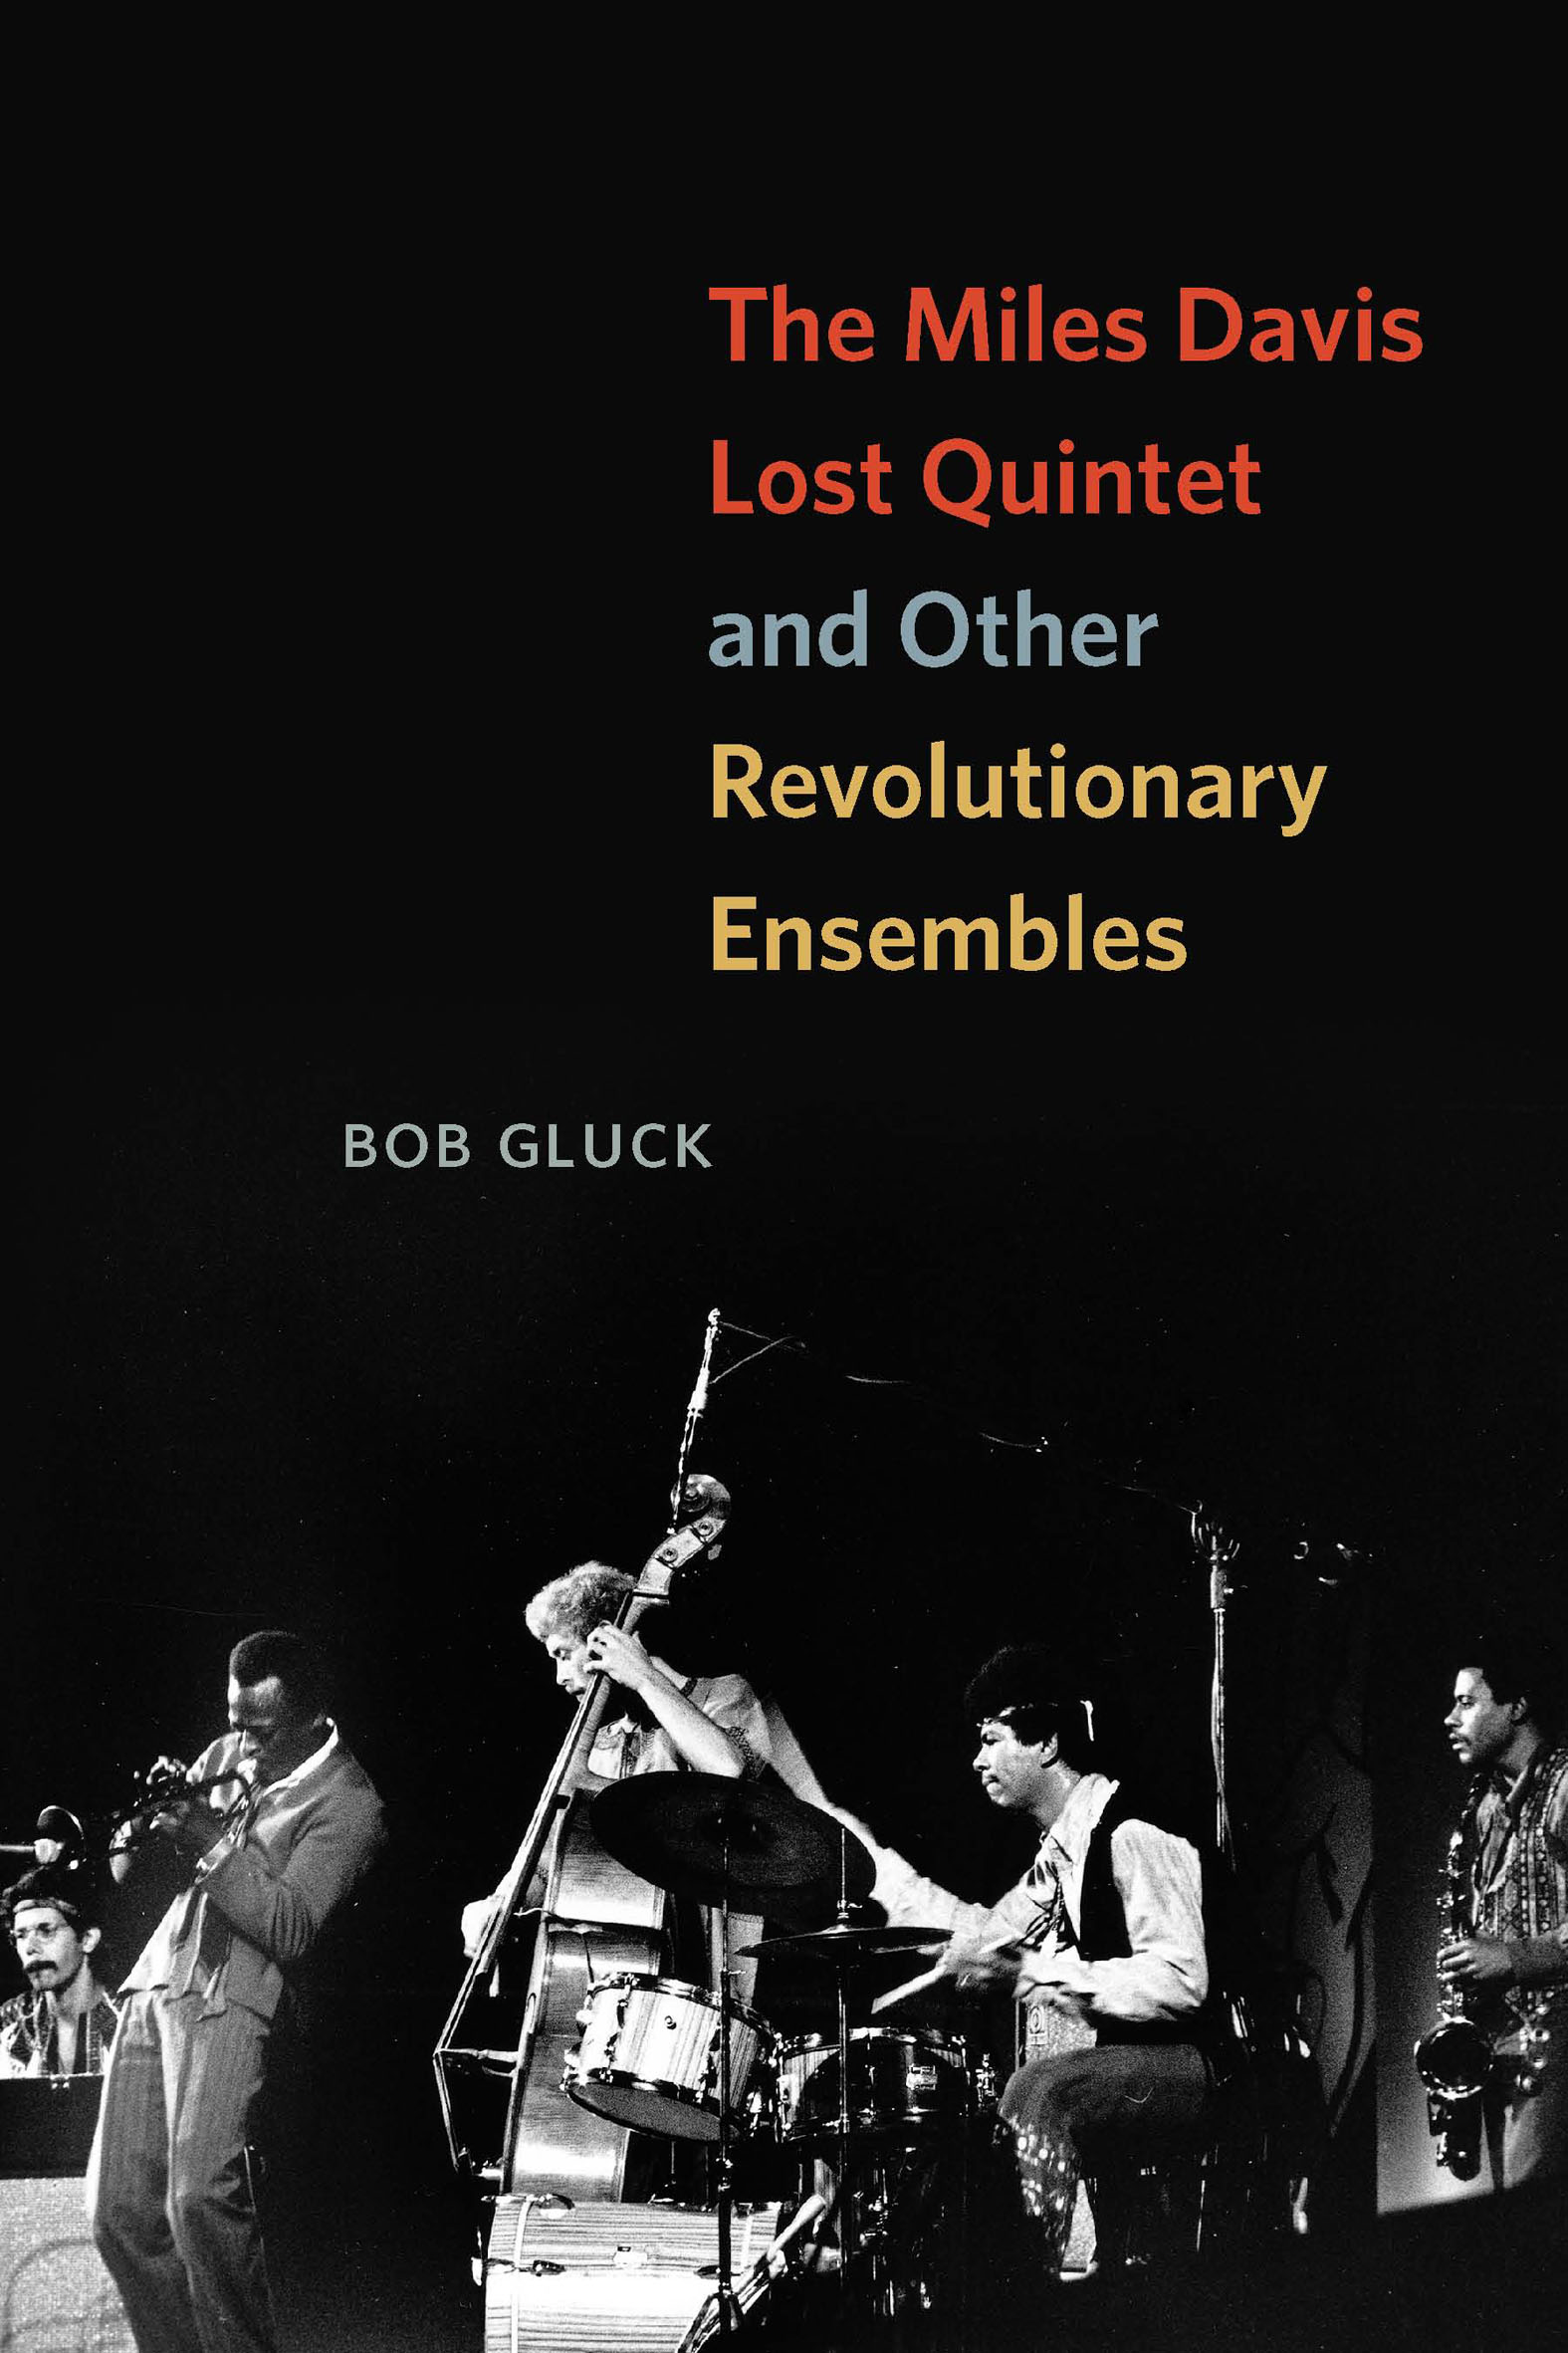 The Miles Davis Lost Quintet and Other Revolutionary Ensembles - 25-49.99